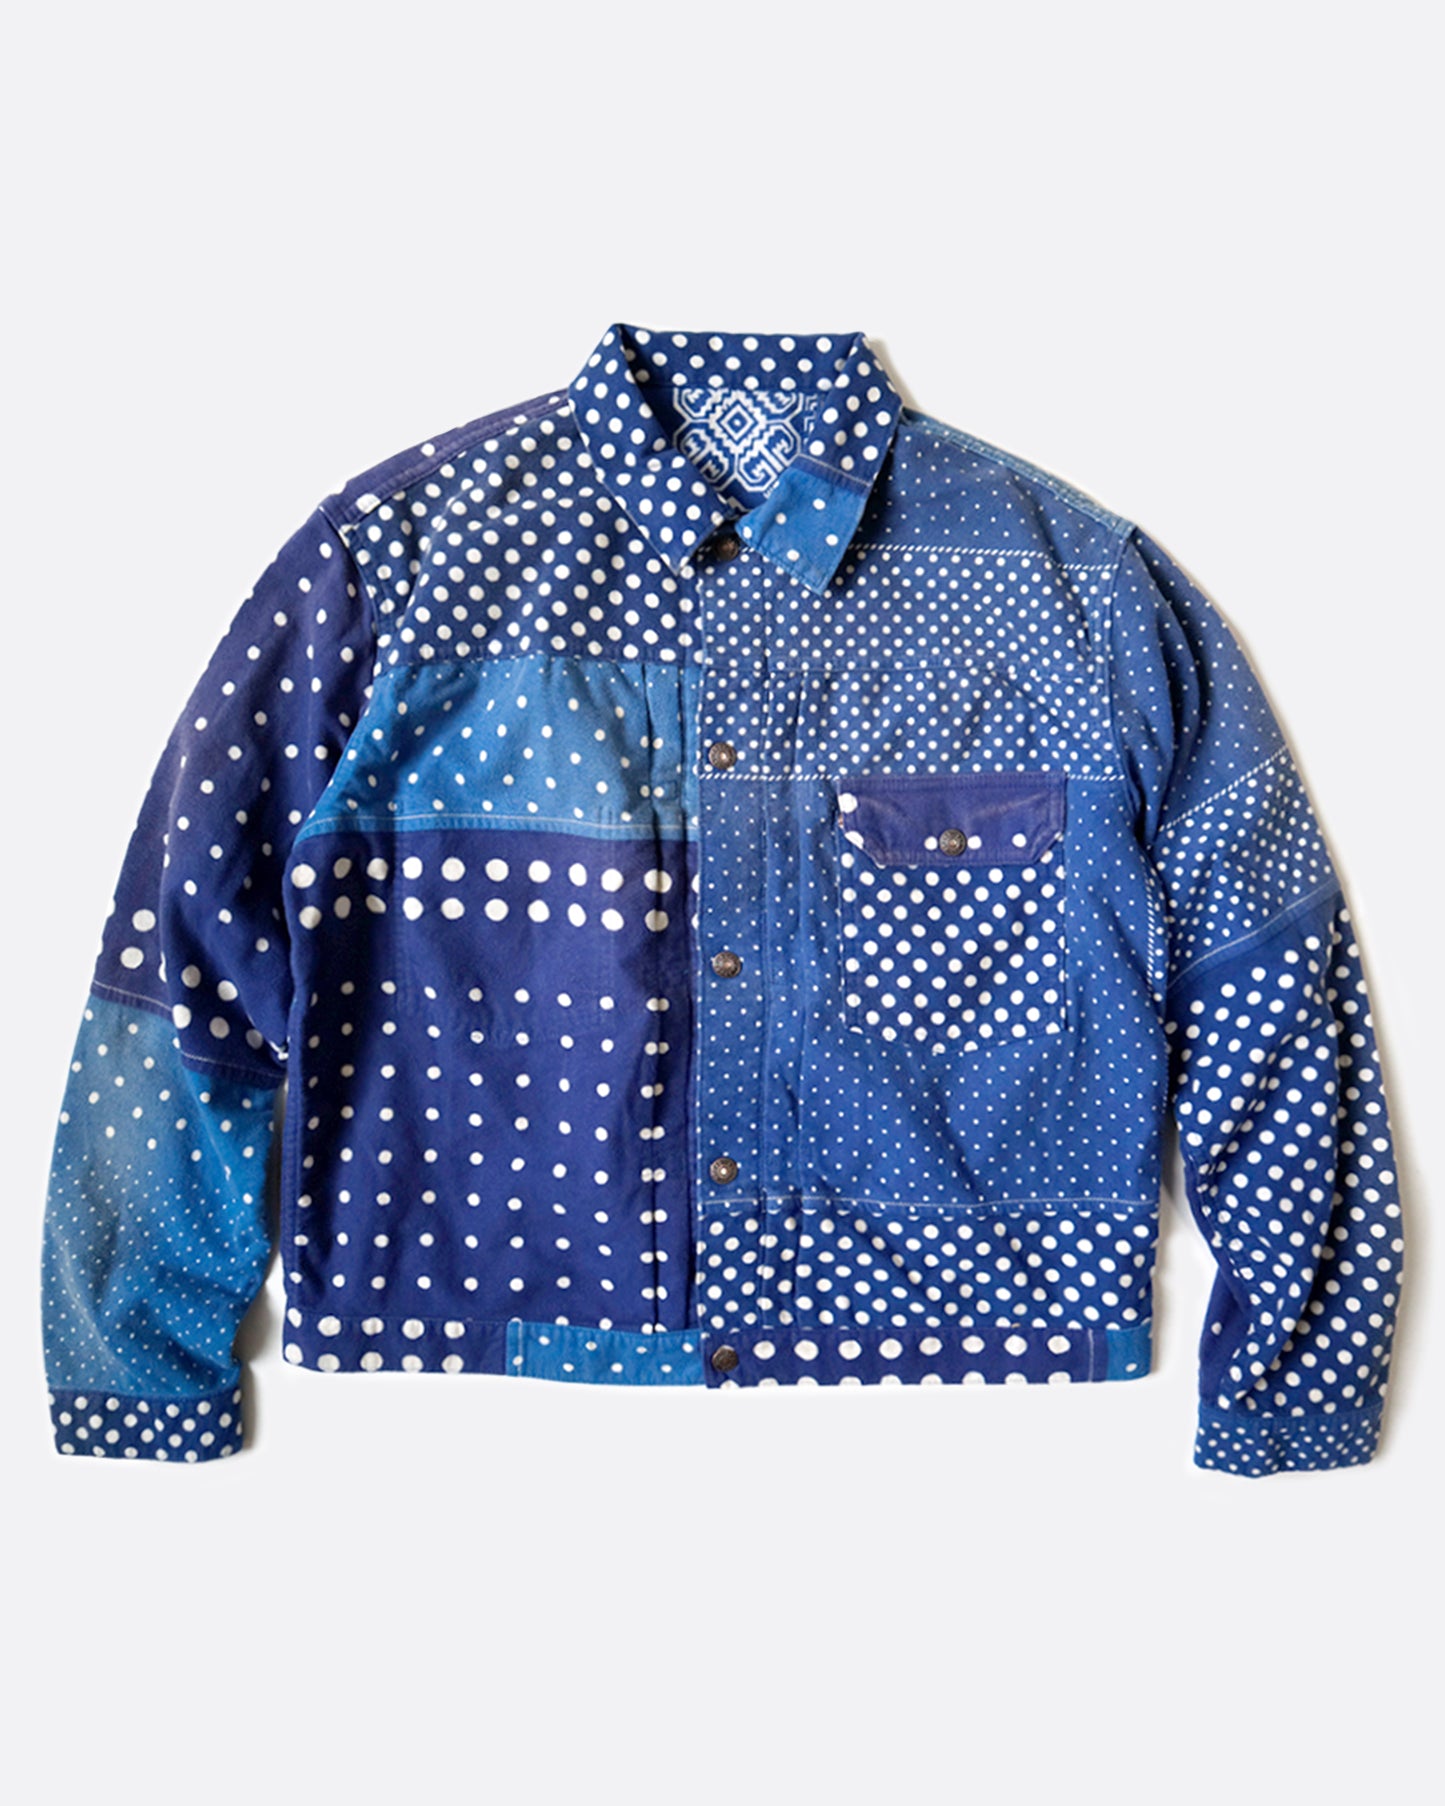 A blue flannel jacket in a patchwork polka dot pattern, shown laying flat.